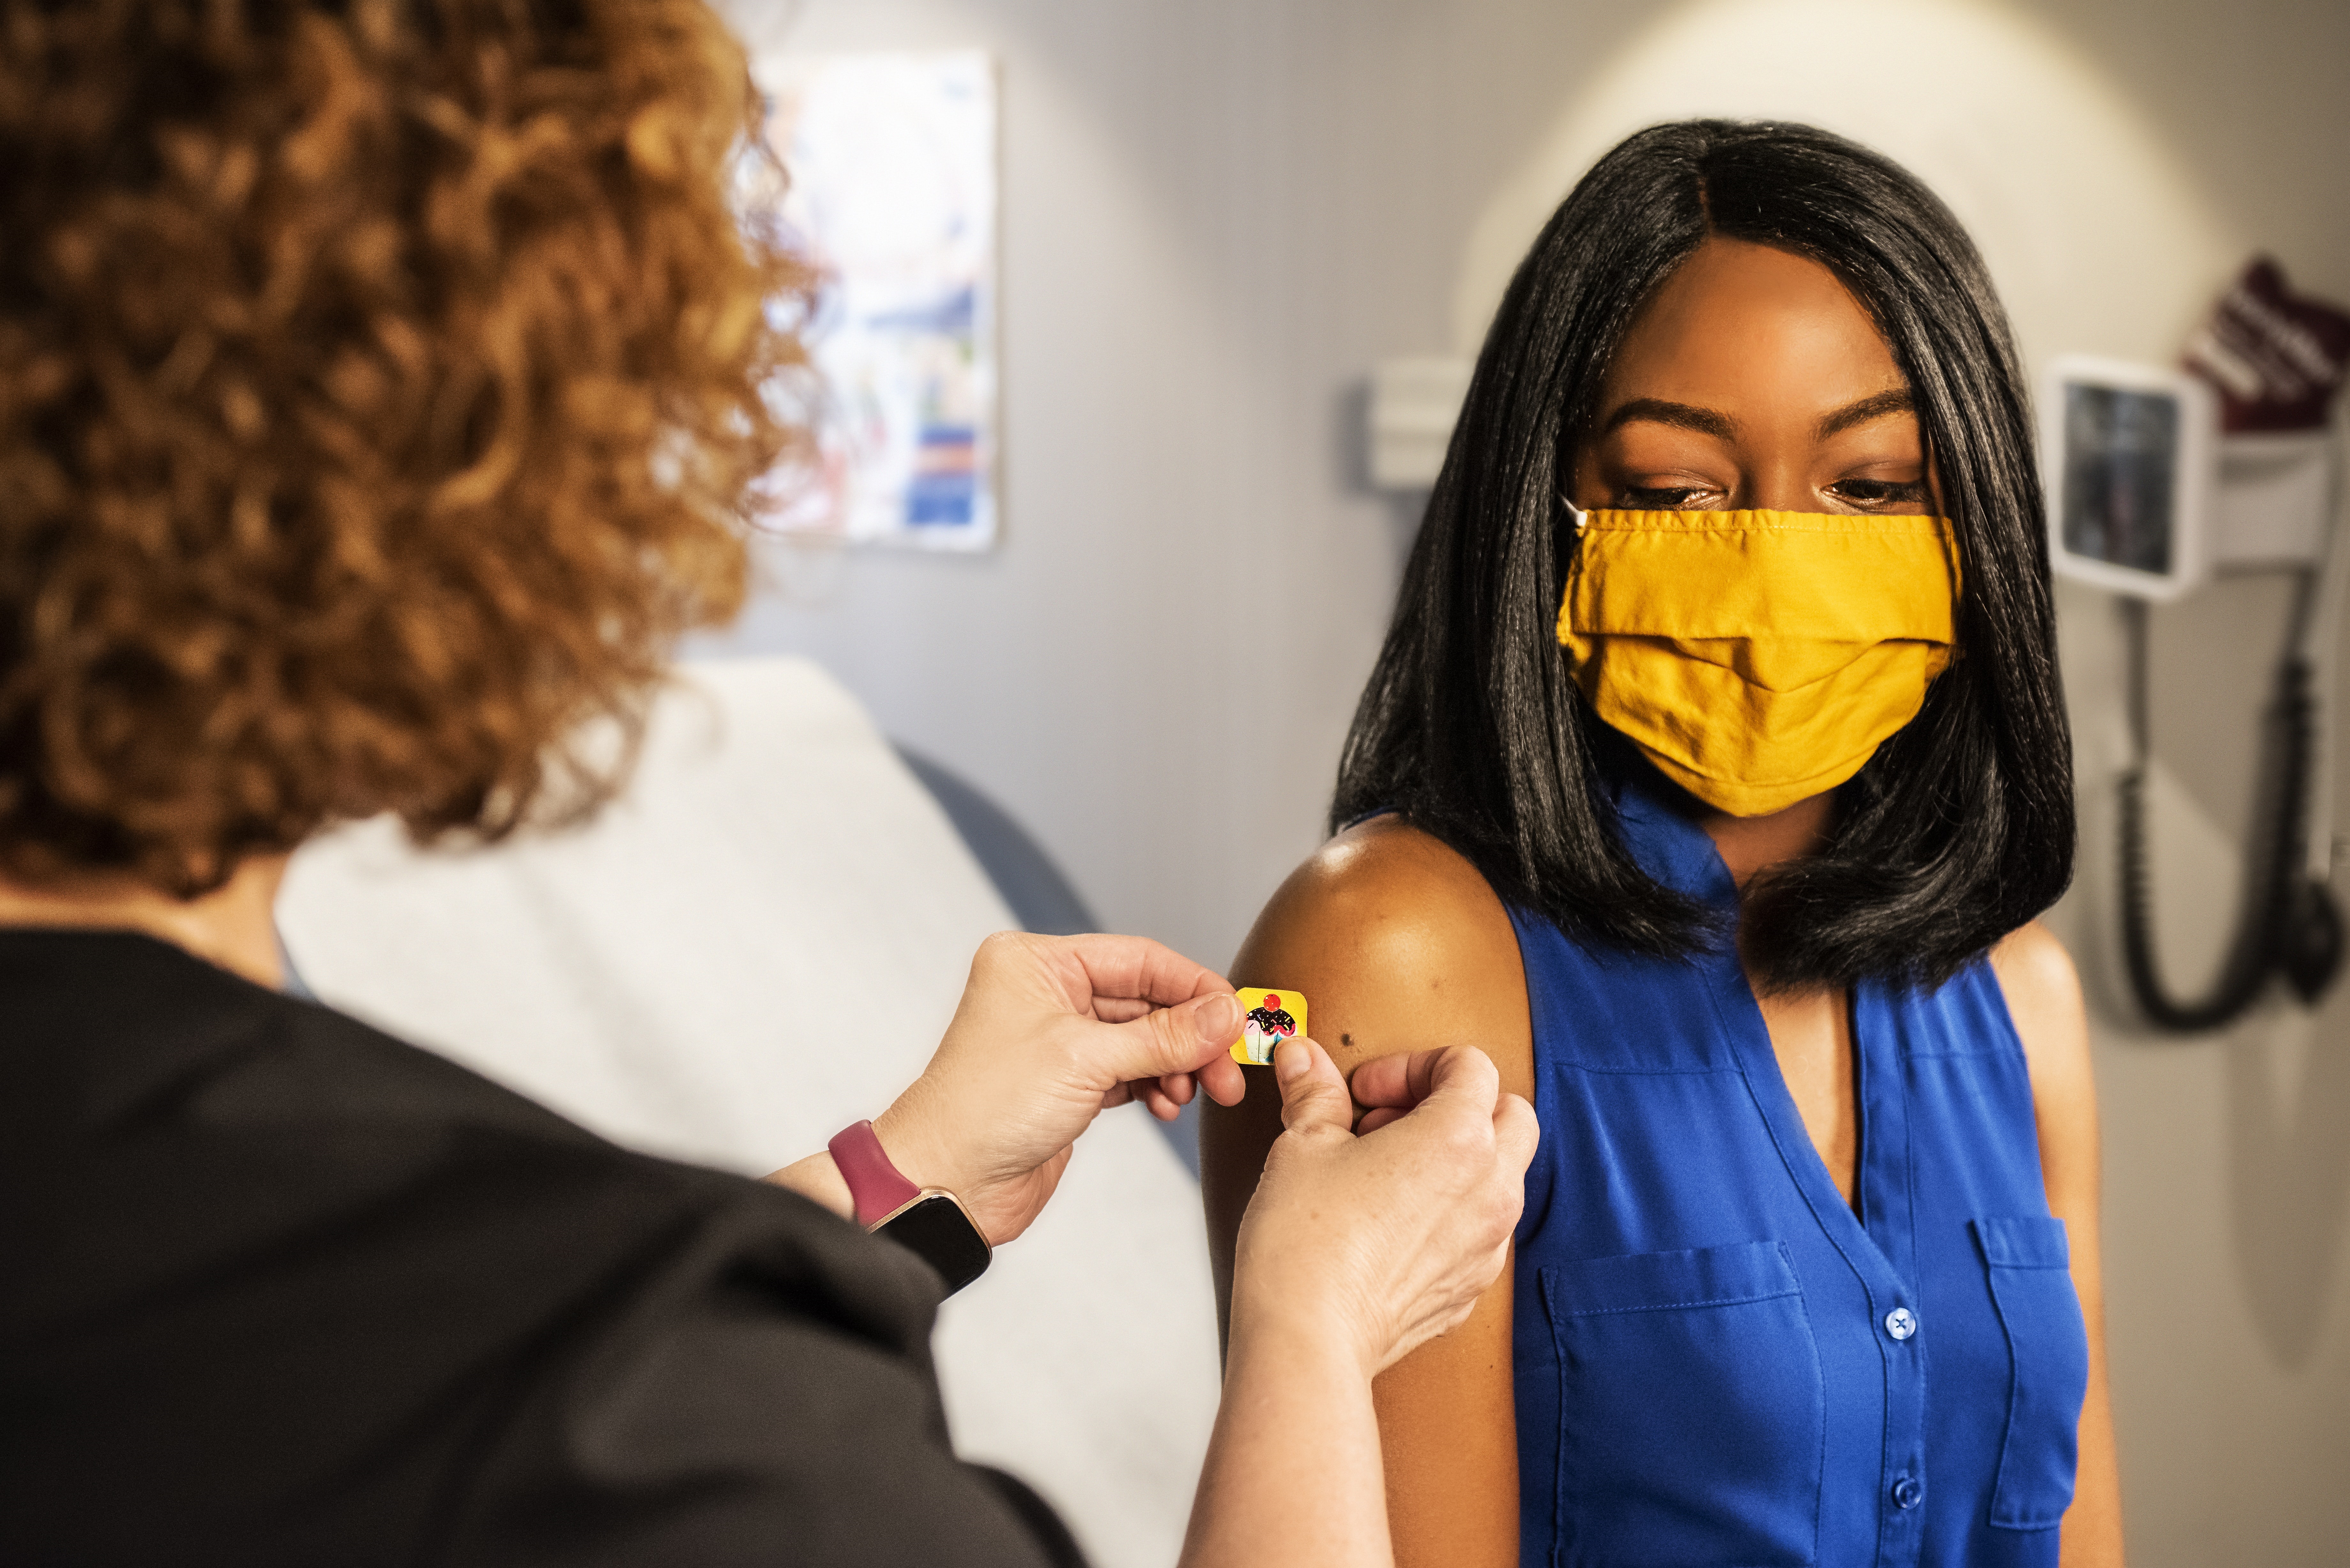 A woman being vaccinated